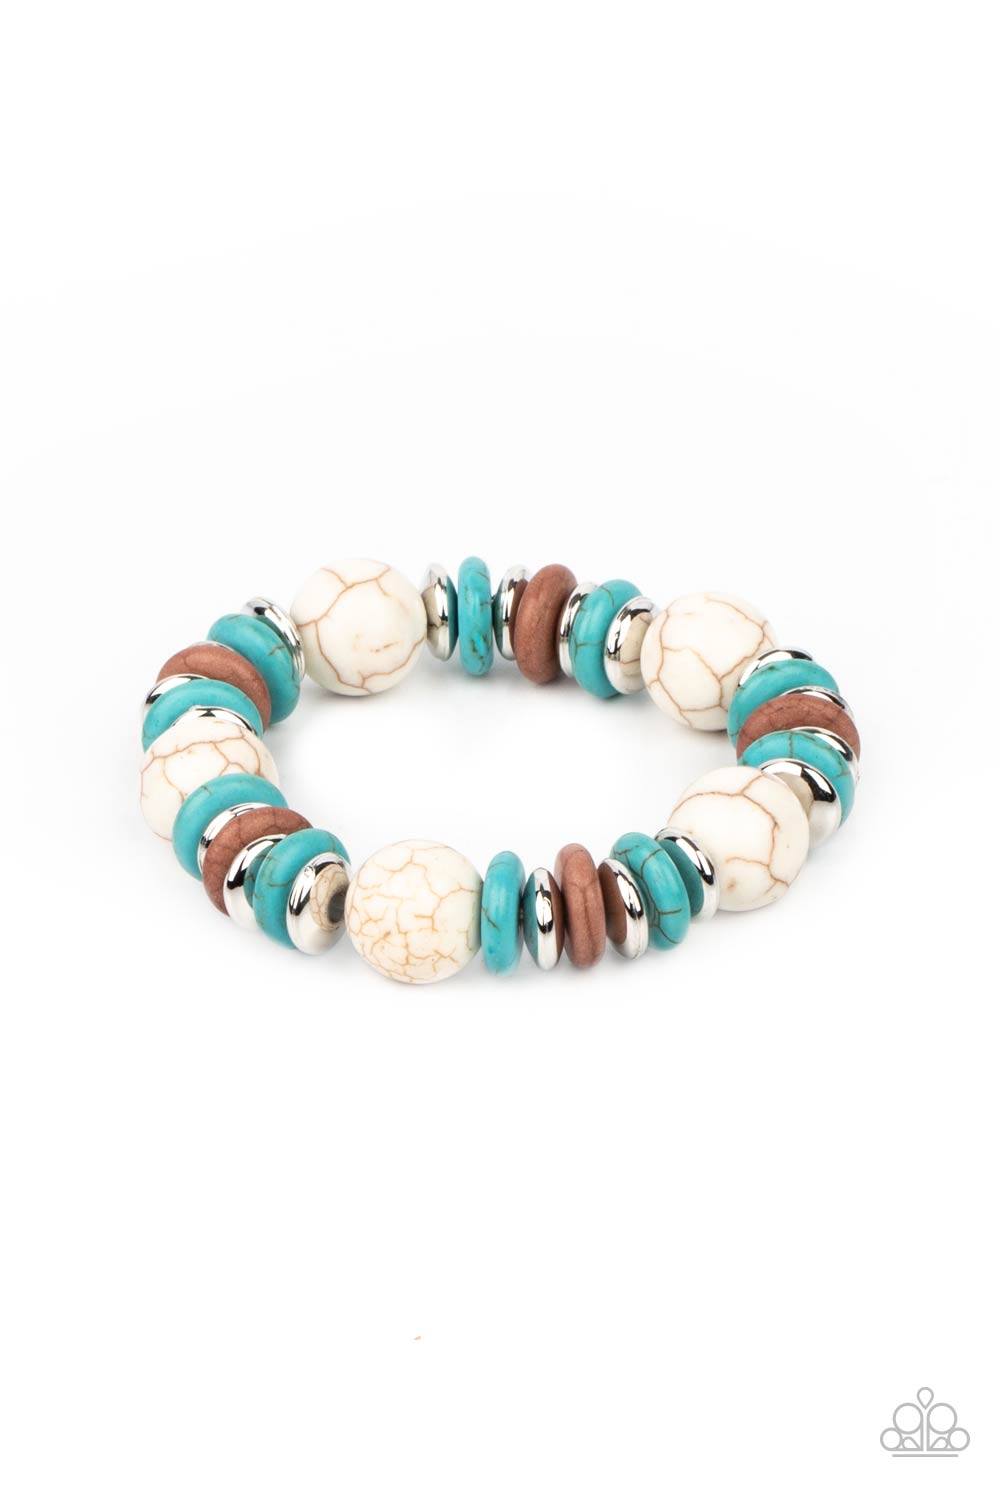 Paparazzi Rustic Rival - Multi Bracelet - A Finishing Touch Jewelry